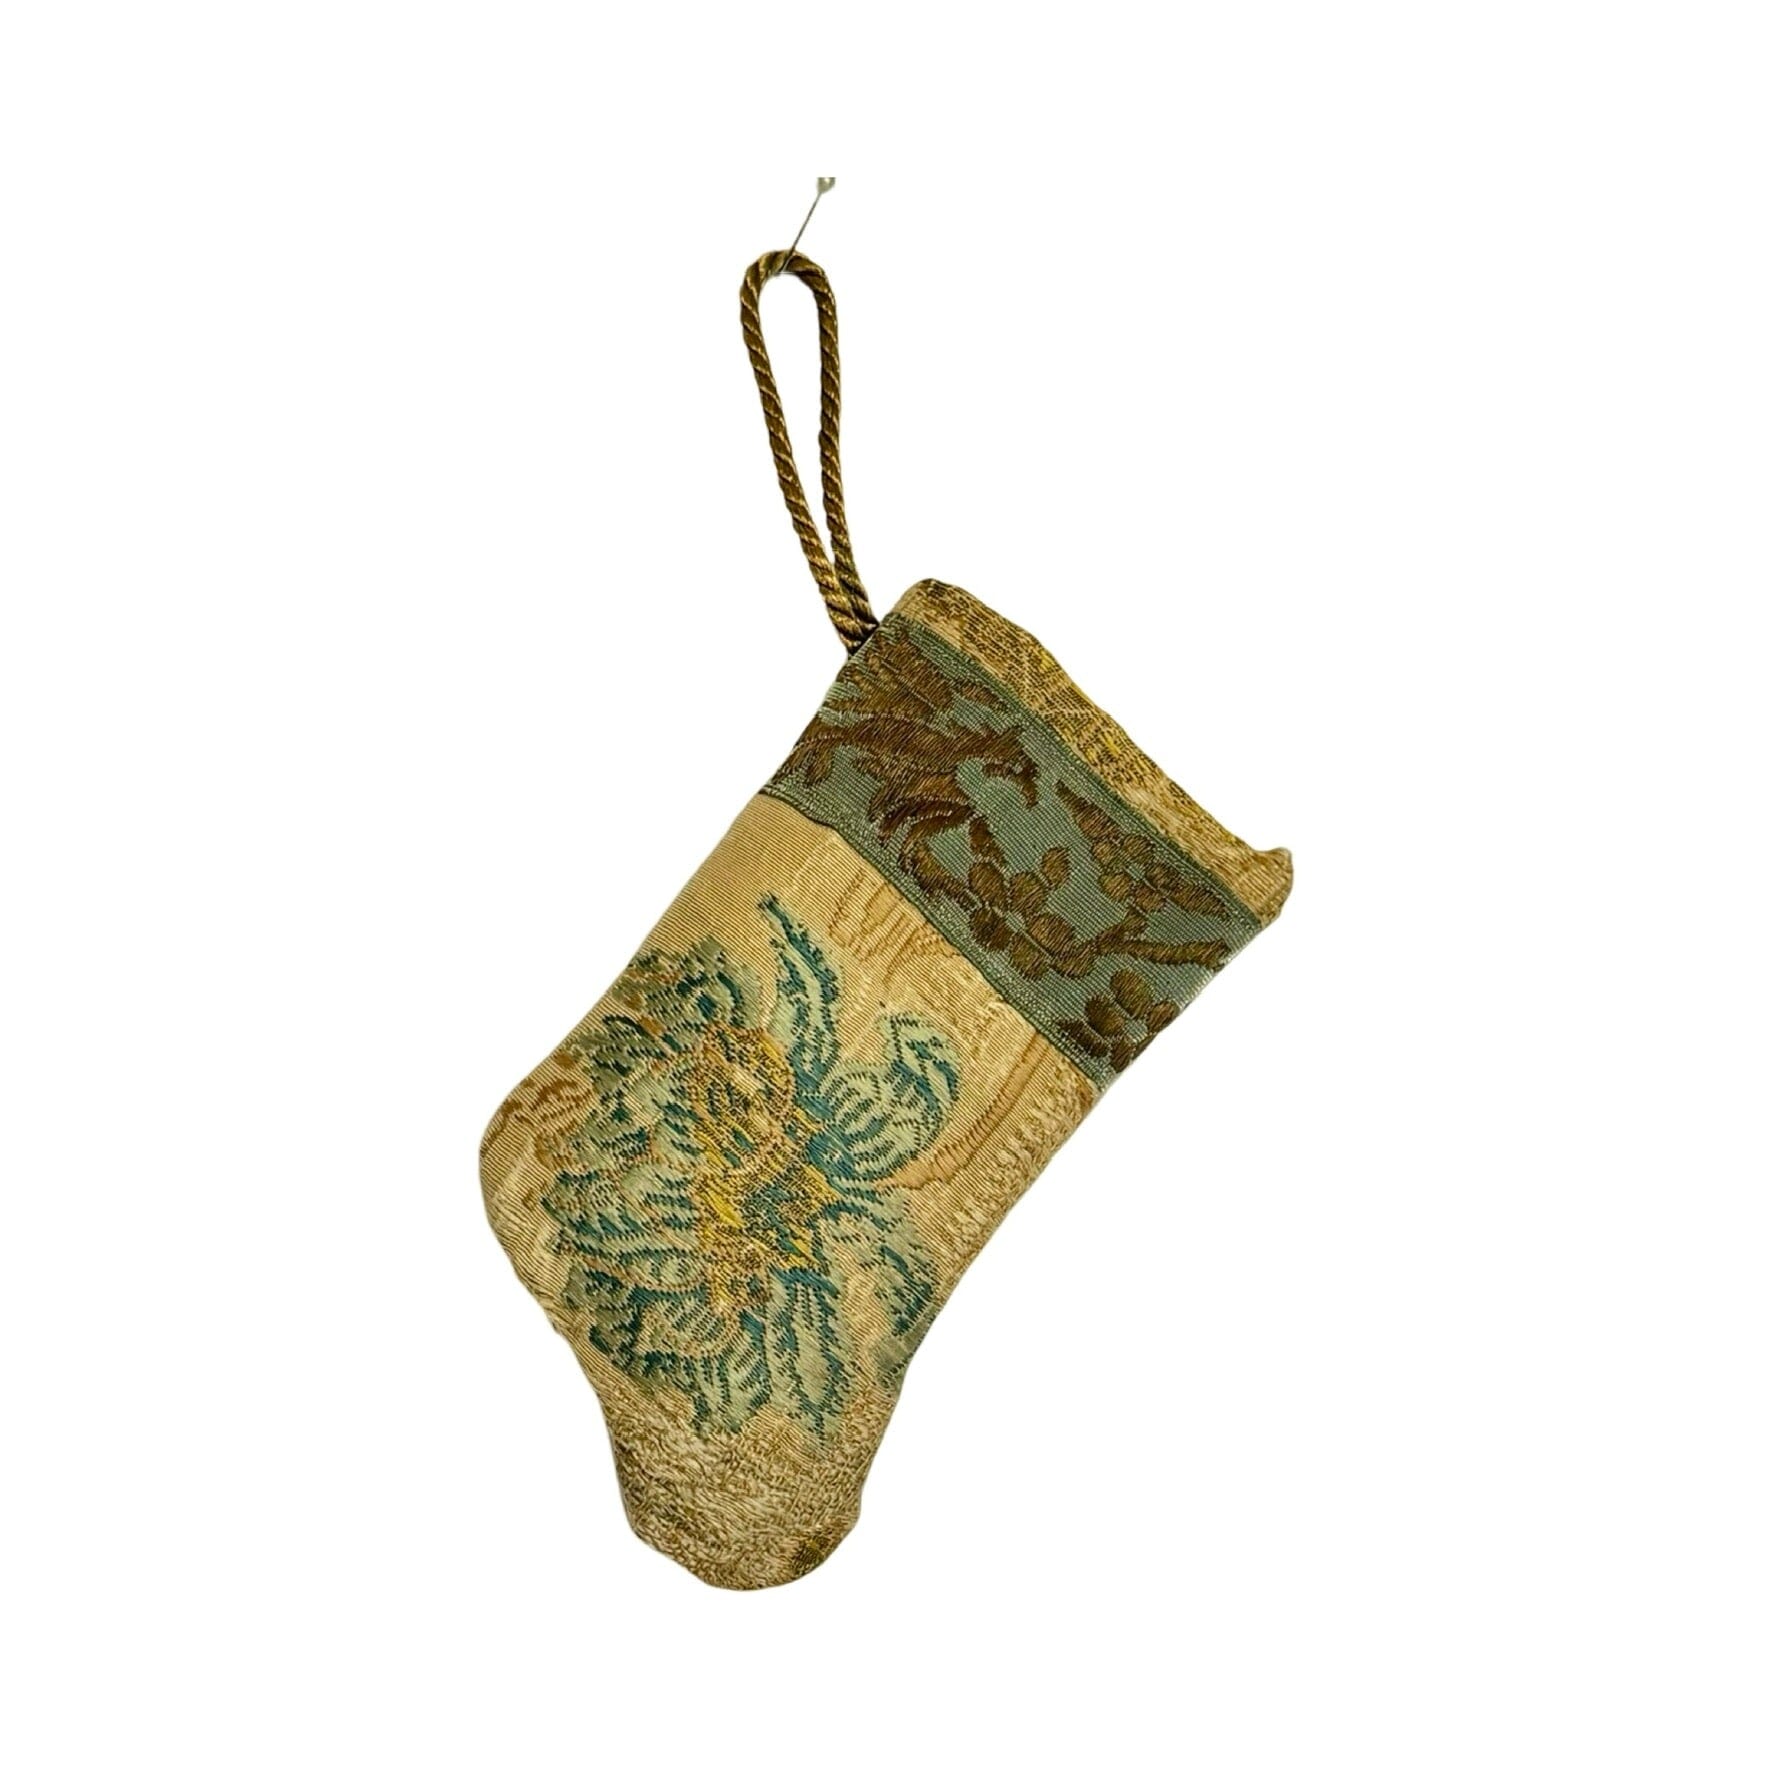 Handmade Mini Stocking Made From Vintage Fabric and Trims- Champagne Embroidery Ornament B. Viz Design 